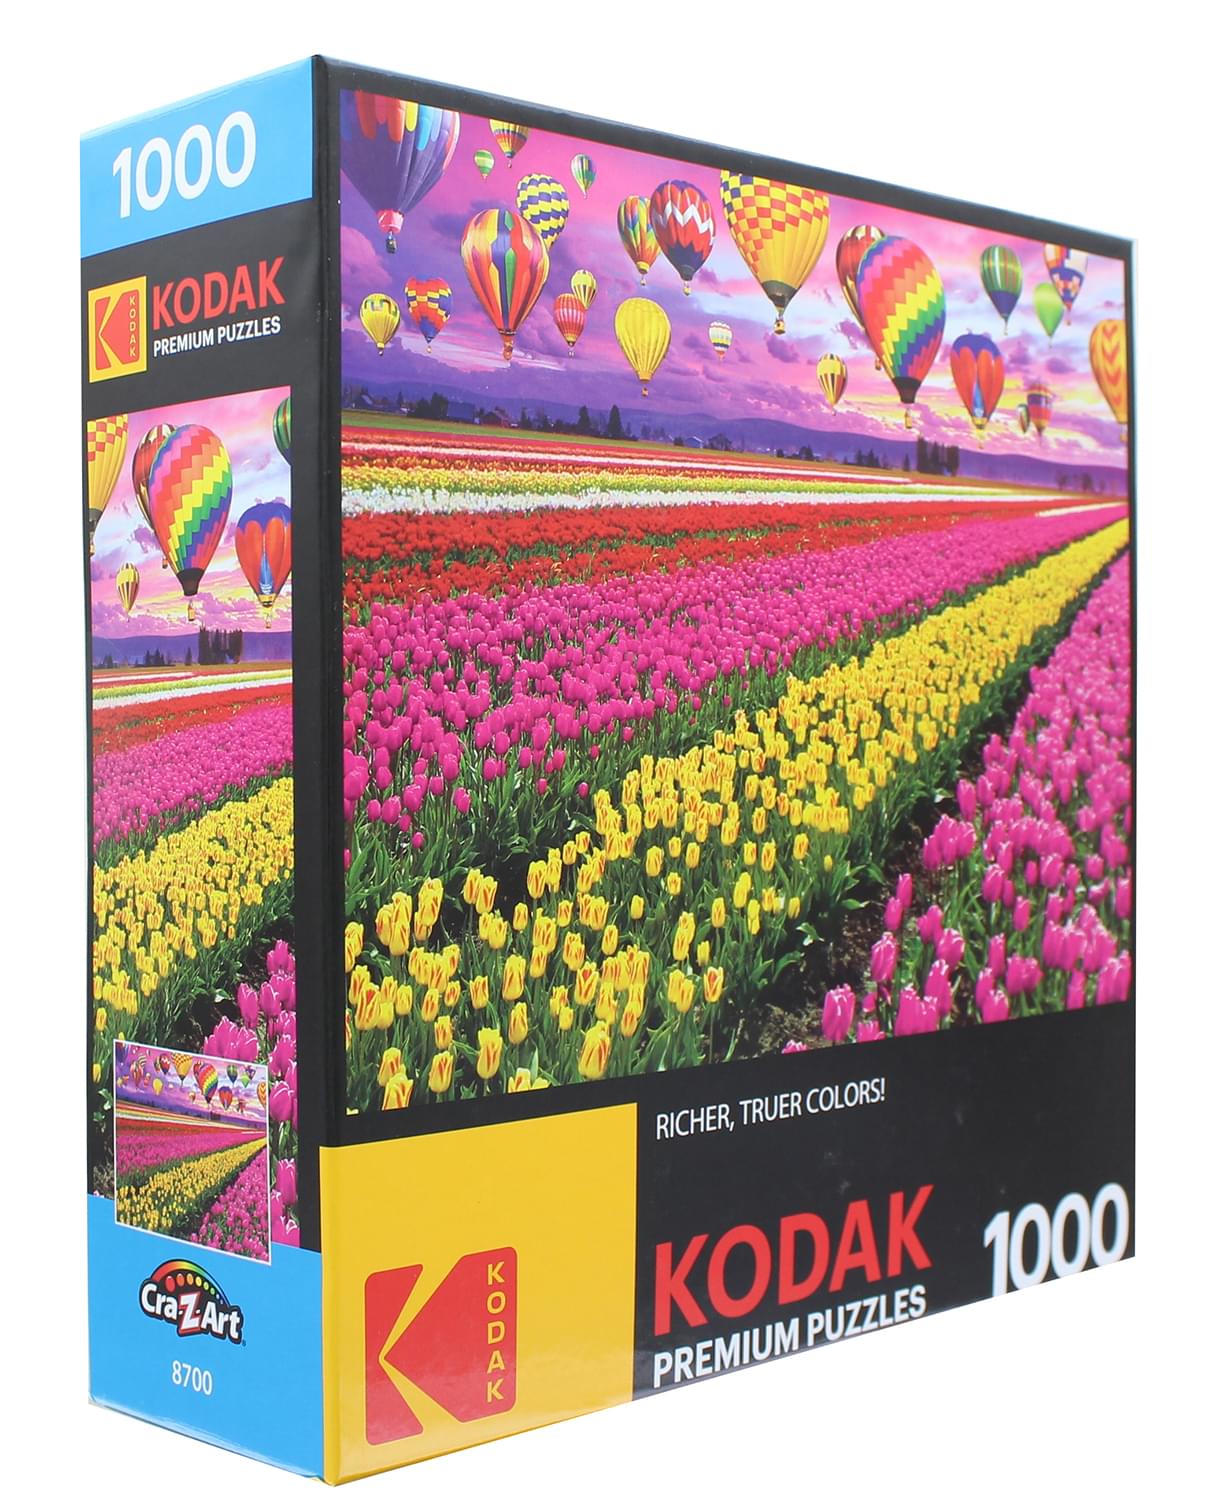 Sunset Balloons Over Tulip Field 1000 Piece Jigsaw Puzzle